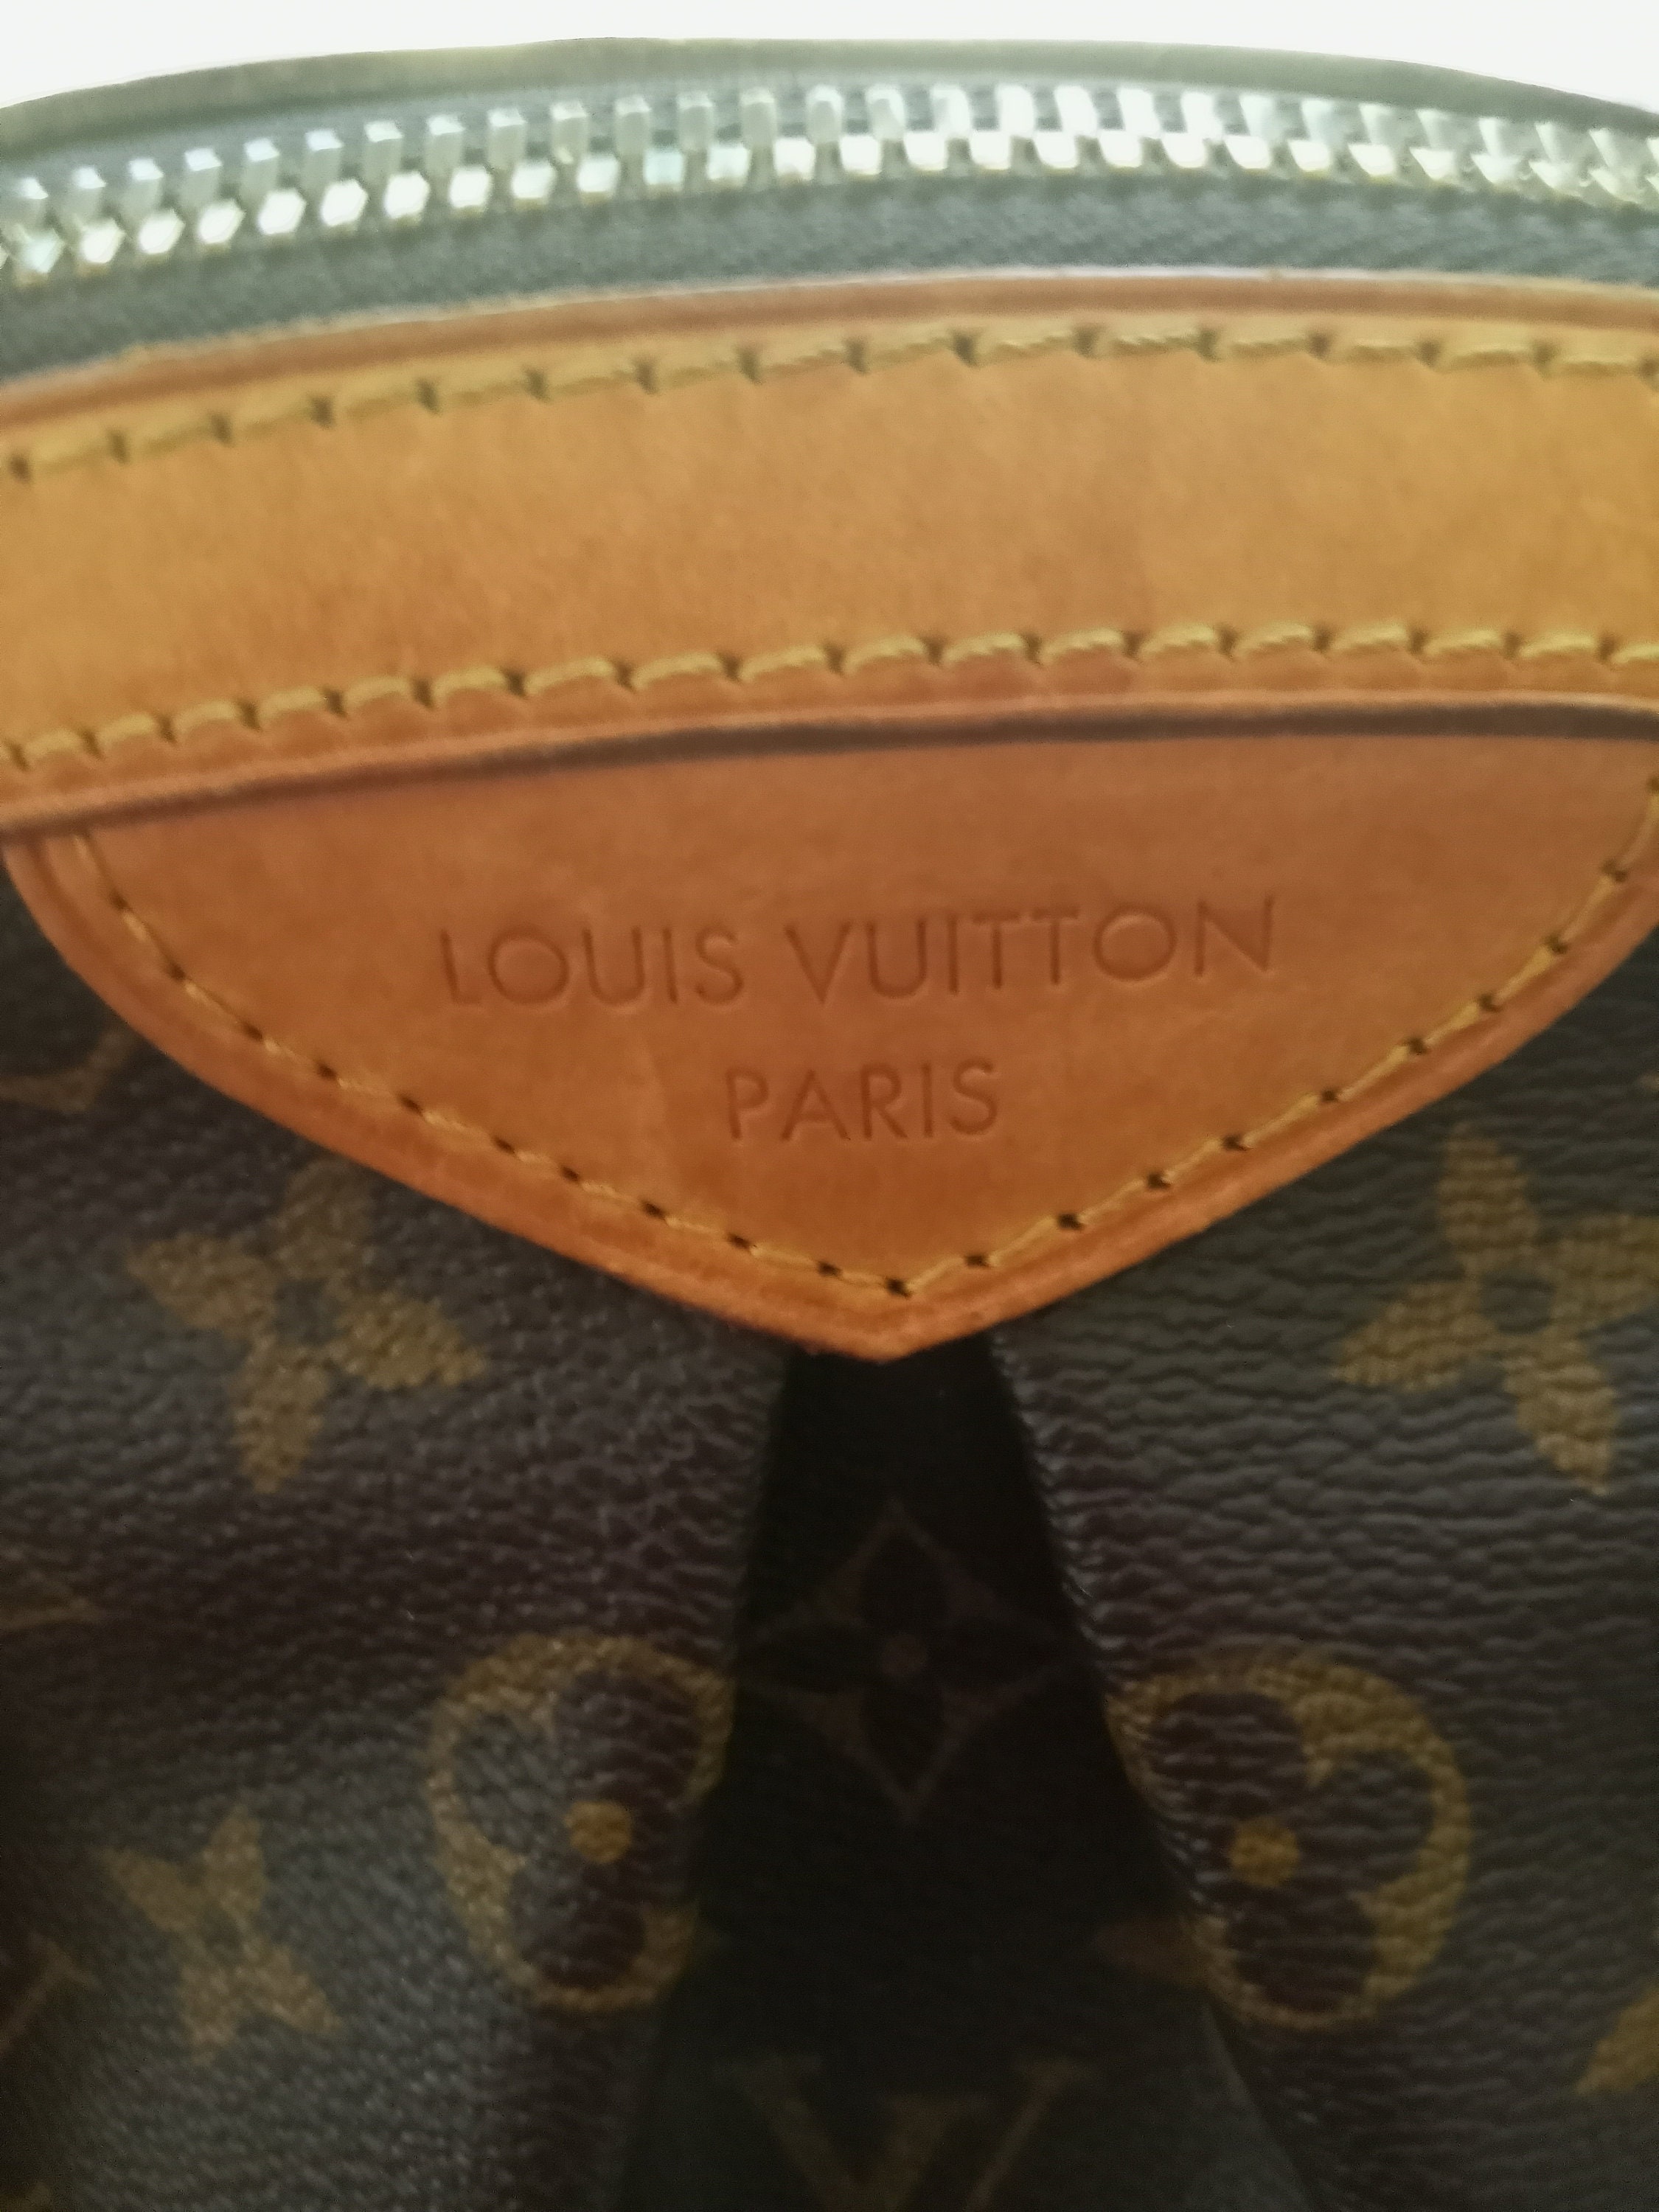 ByDysign Handcrafted Jewelry & Refurbished Louis Vuitton